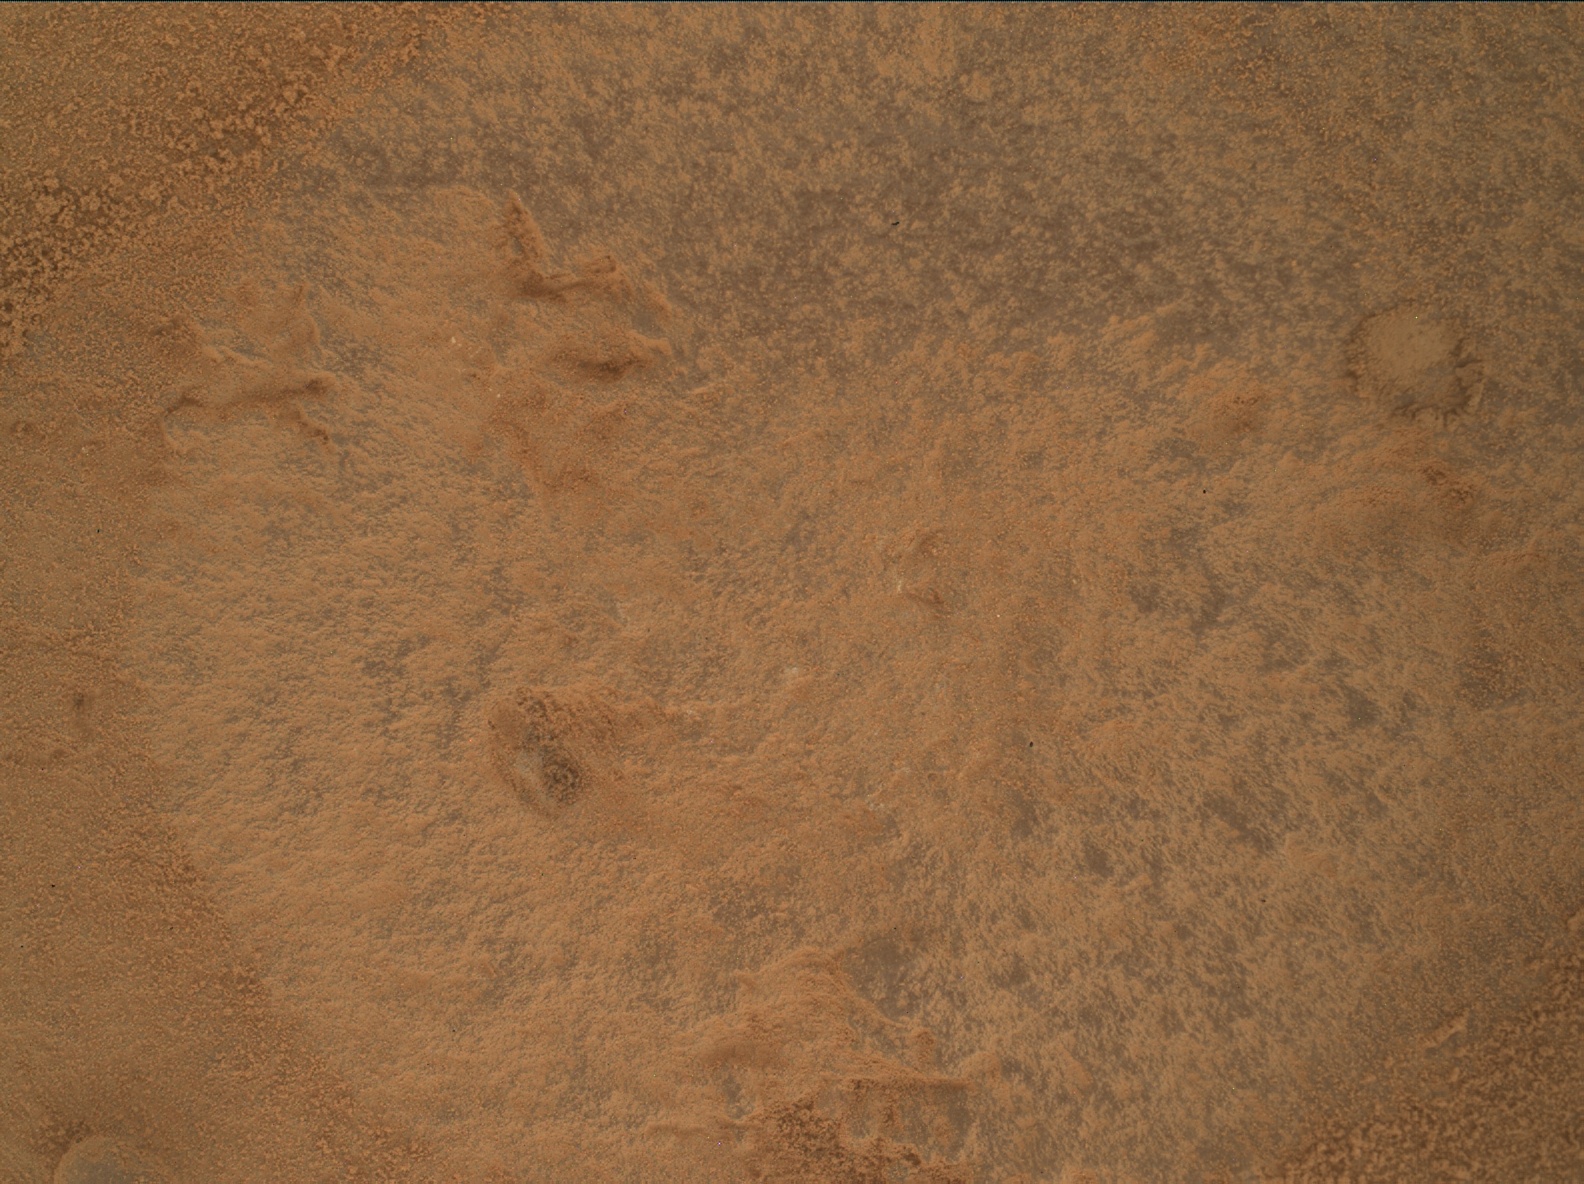 Nasa's Mars rover Curiosity acquired this image using its Mars Hand Lens Imager (MAHLI) on Sol 3715